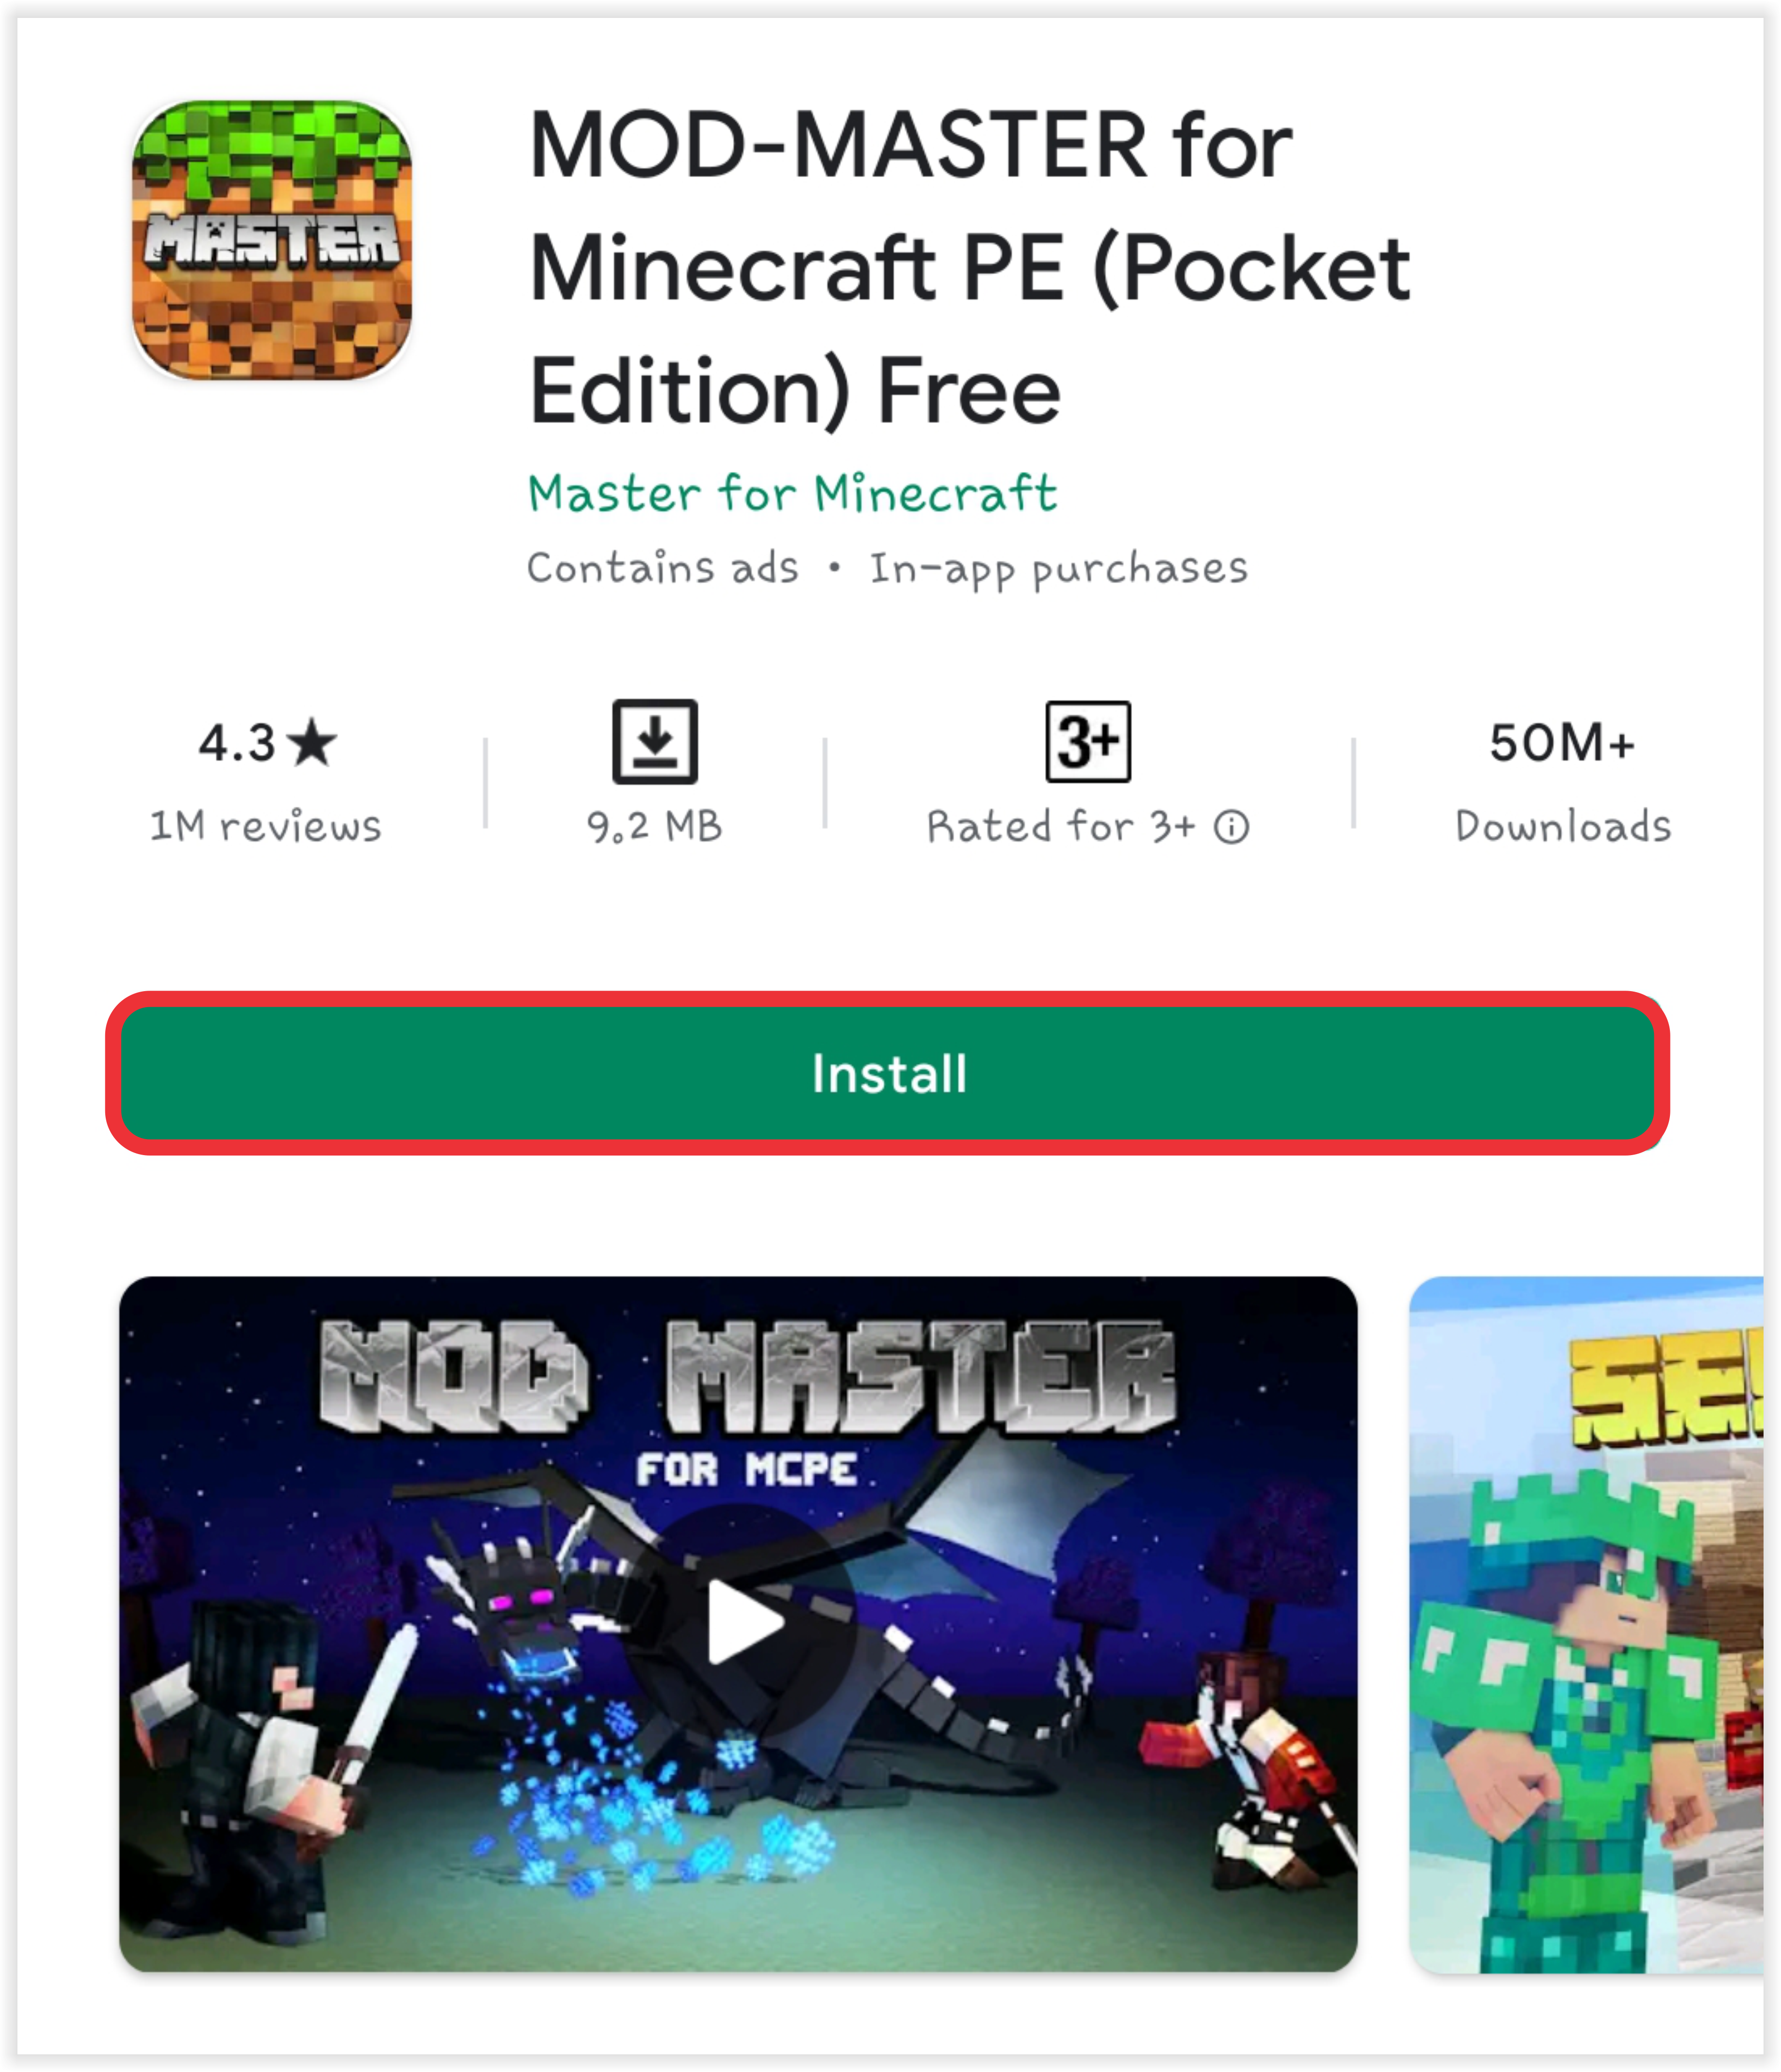 Minecraft 2022 how to download and install mods